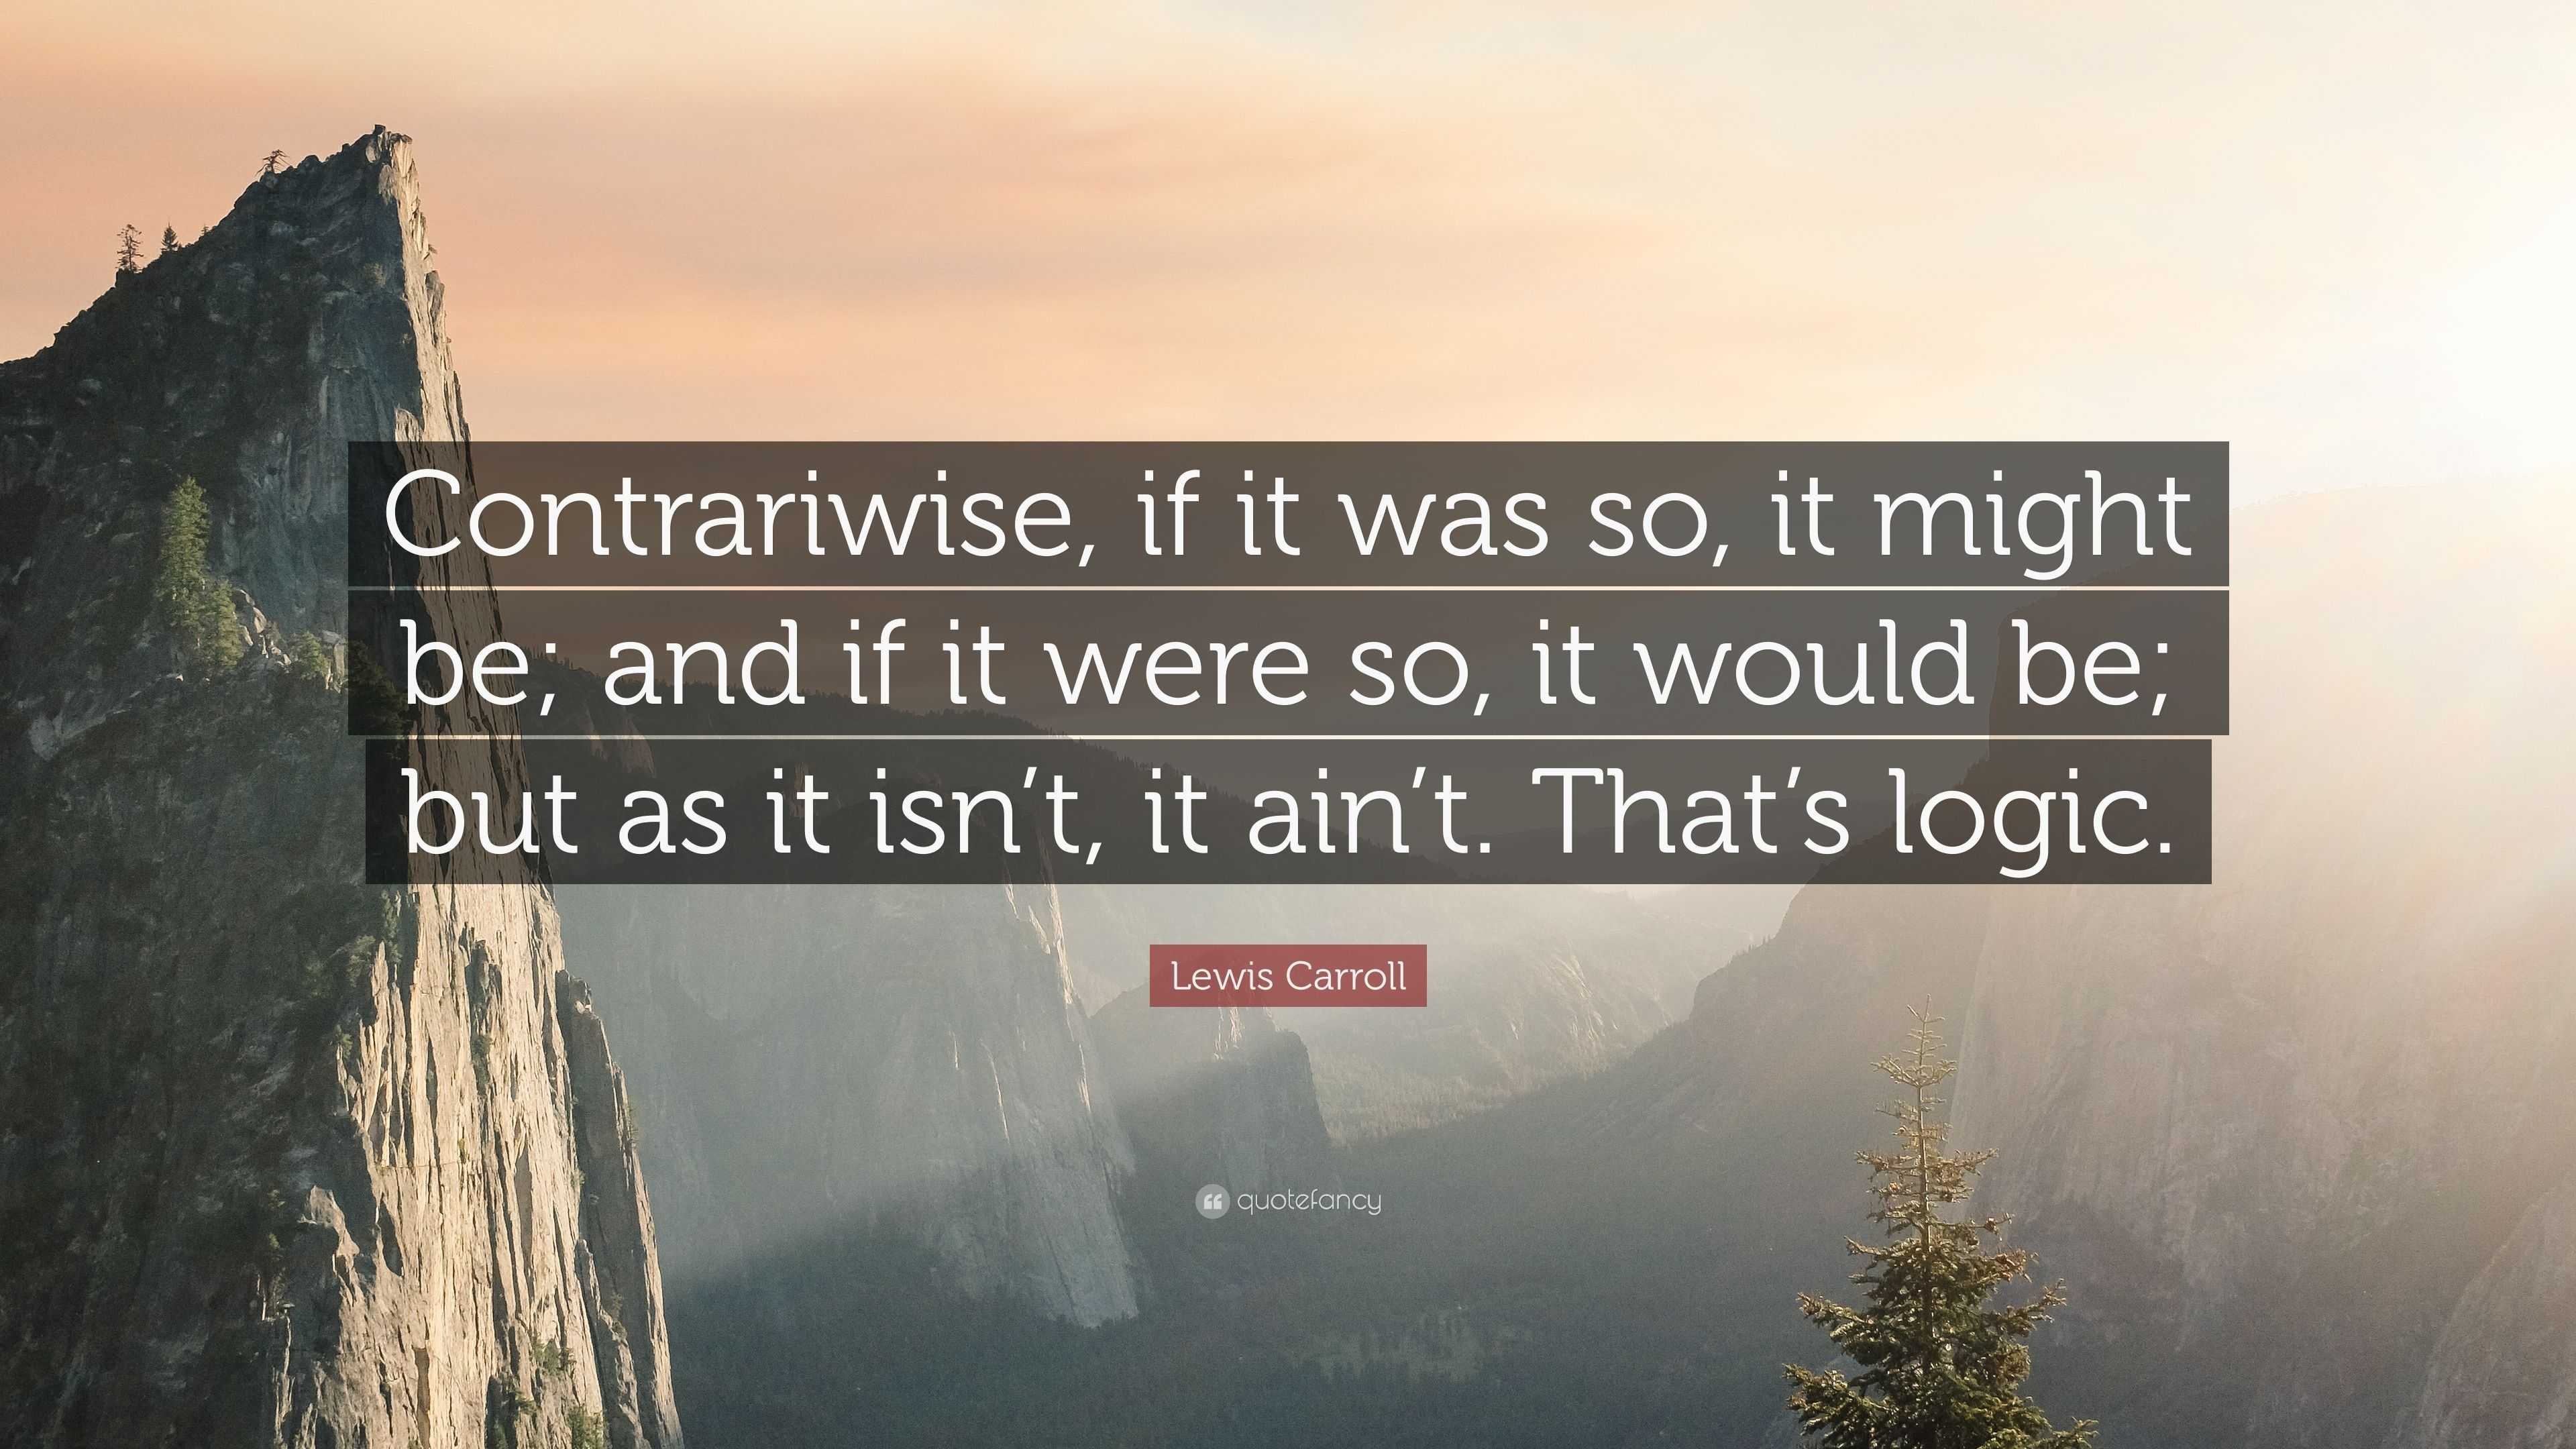 Lewis Carroll Quote: “Contrariwise, if it was so, it might be; and if